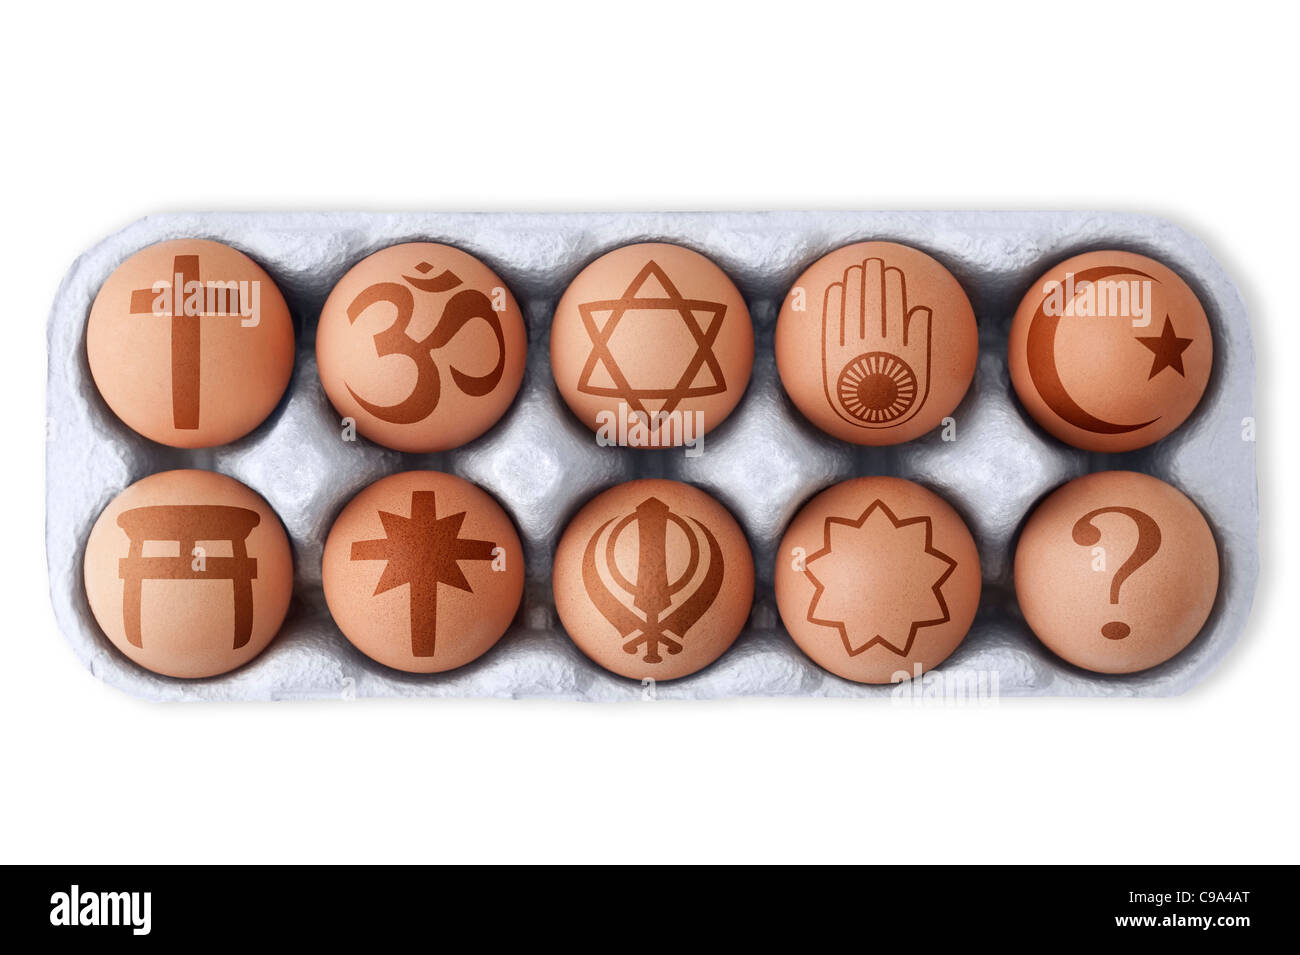 Eggs In Box with different symbols of global religions printed on nine & one with a question mark.  White background, Cutout Stock Photo